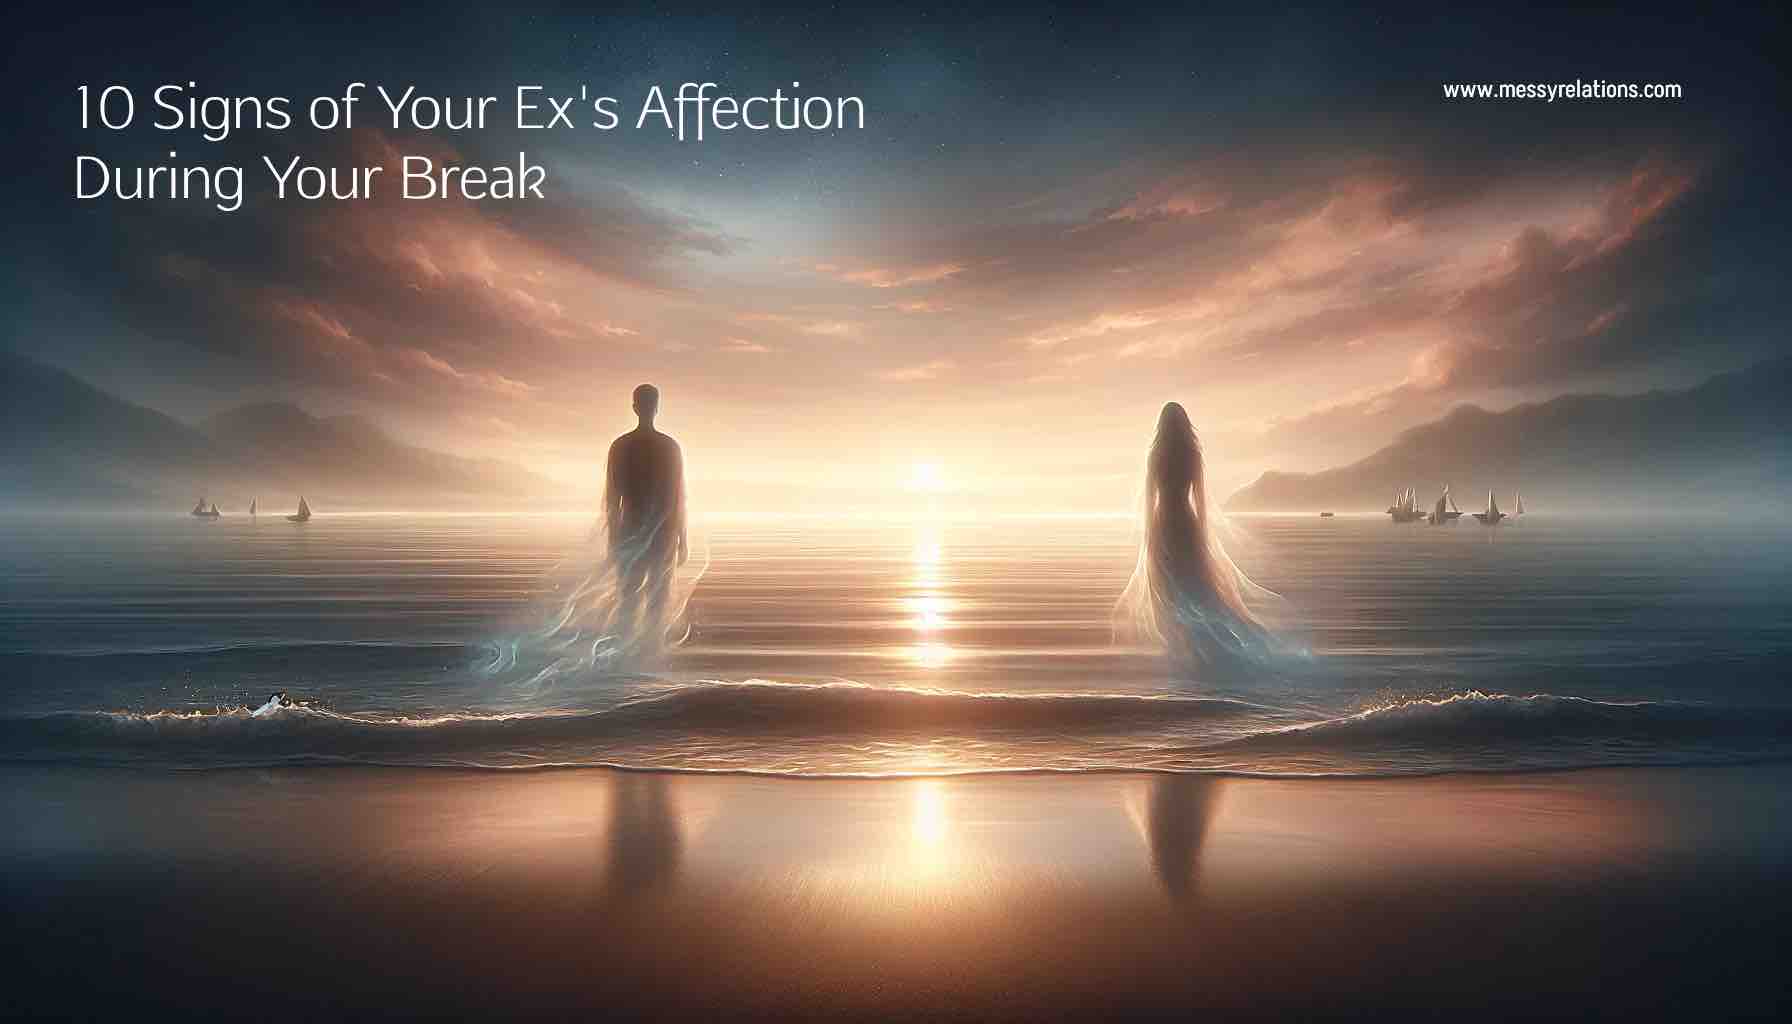 Signs of Your Ex's Affection